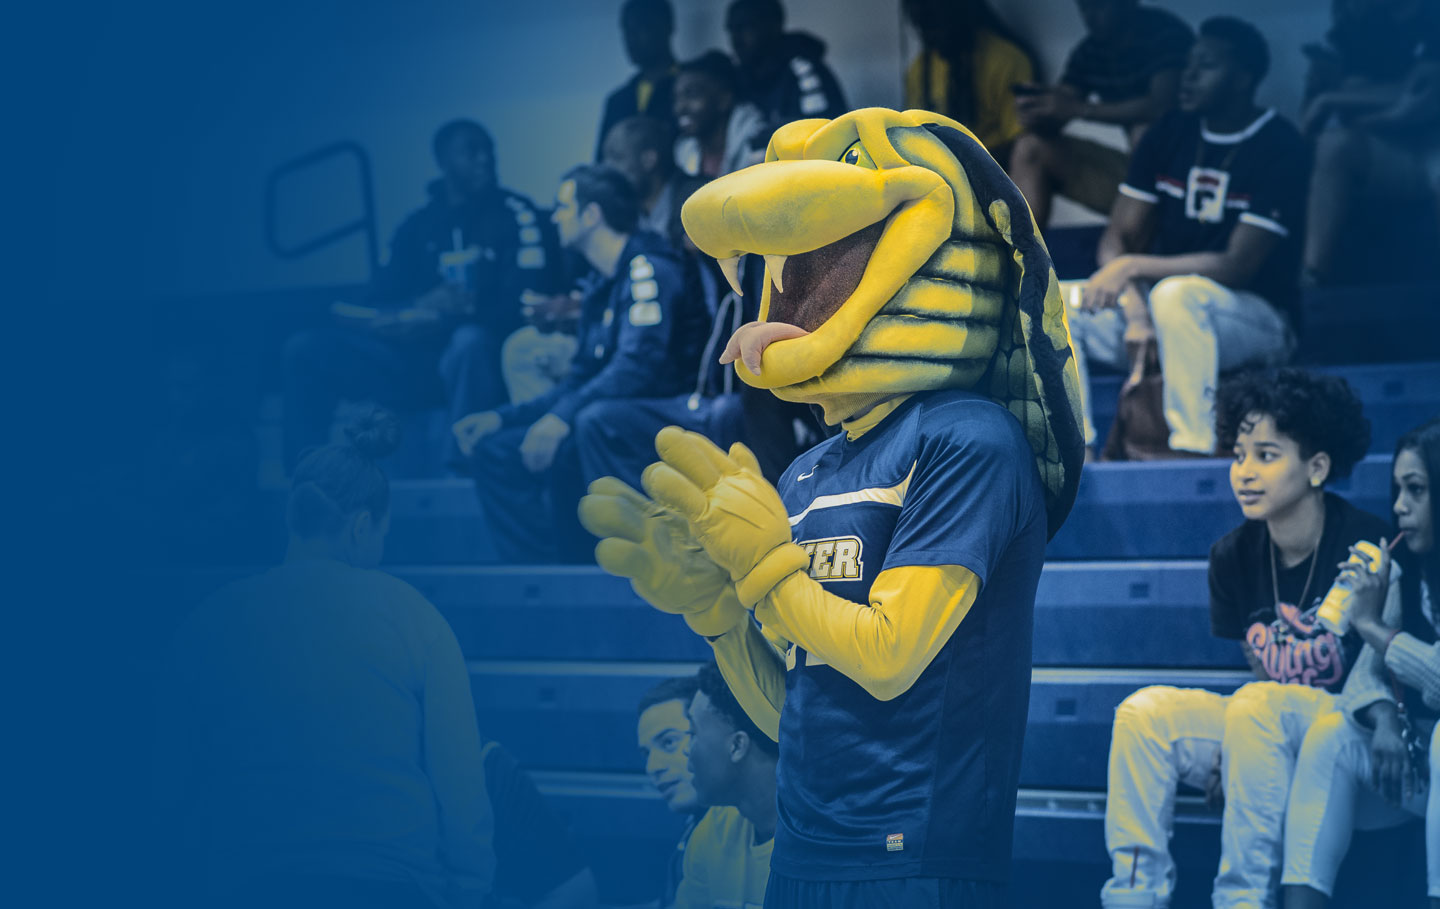 Striker the Cobra, the Coker Mascot, clapping in front of bleachers seated by students